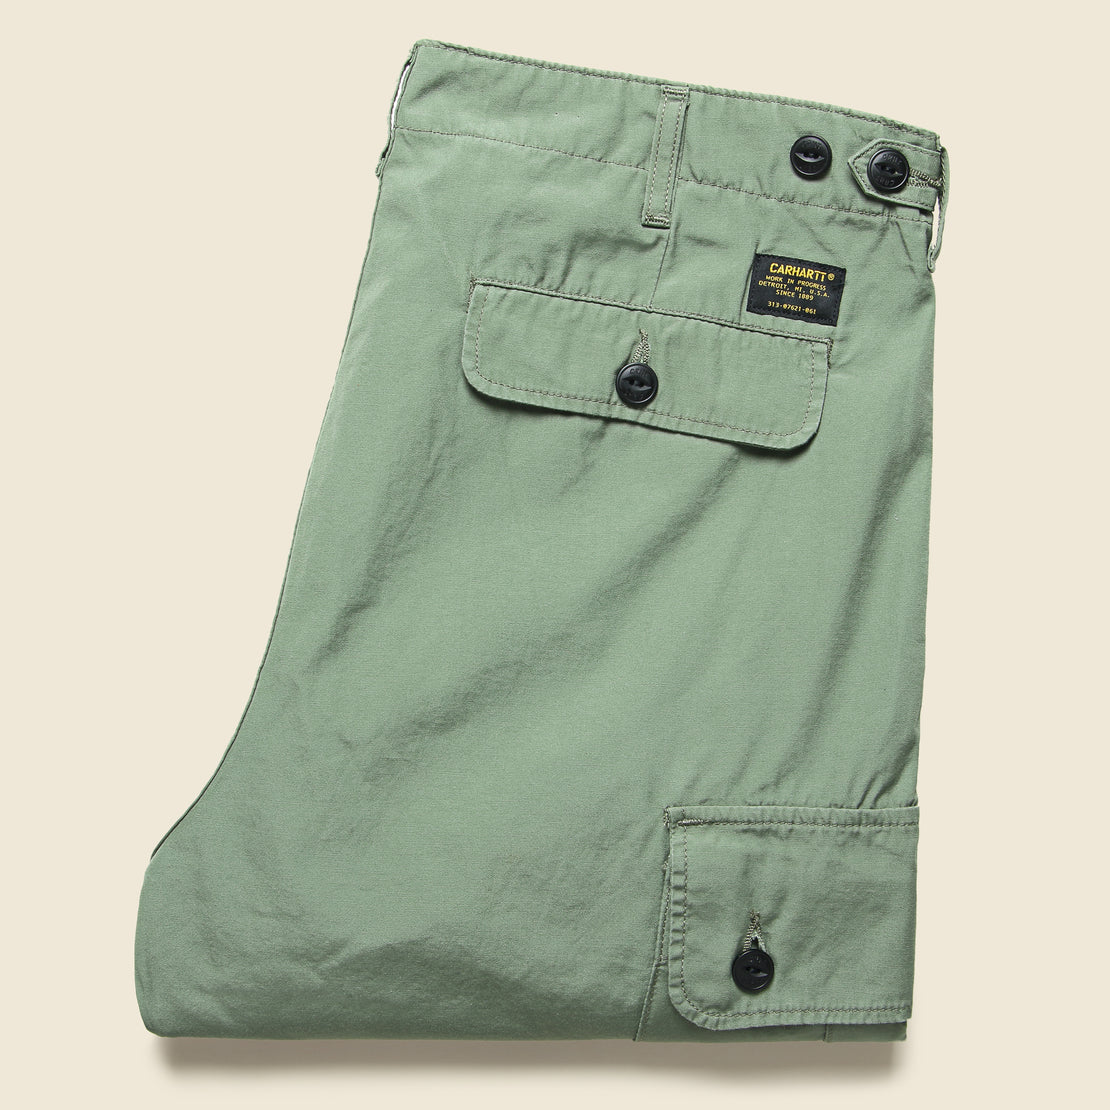 Shelter Cargo Pant - Dollar Green - Carhartt WIP - STAG Provisions - Pants - Twill